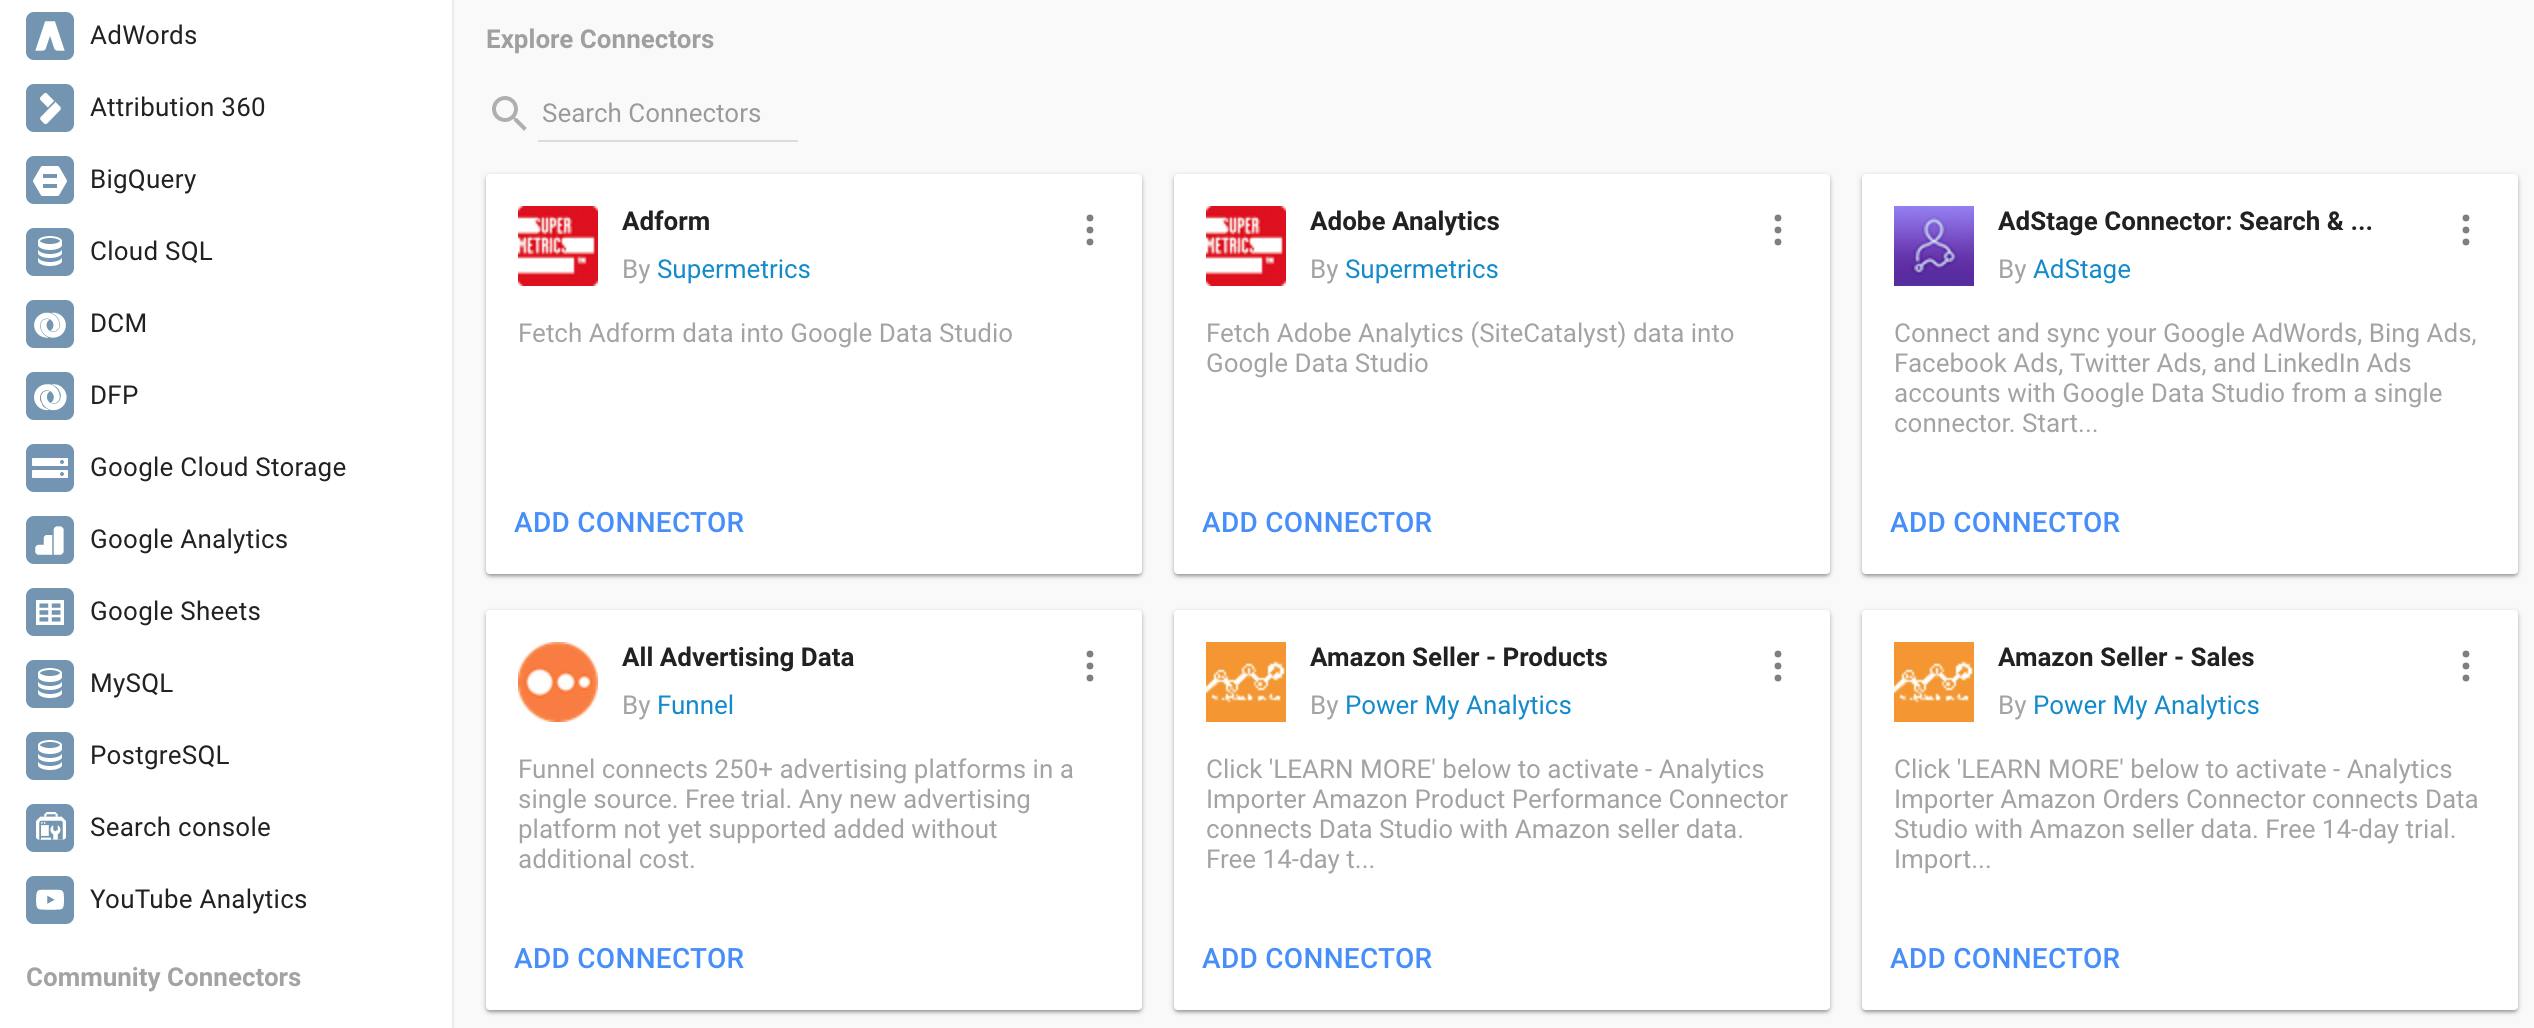 How to Build a Google Data Studio Community Connector